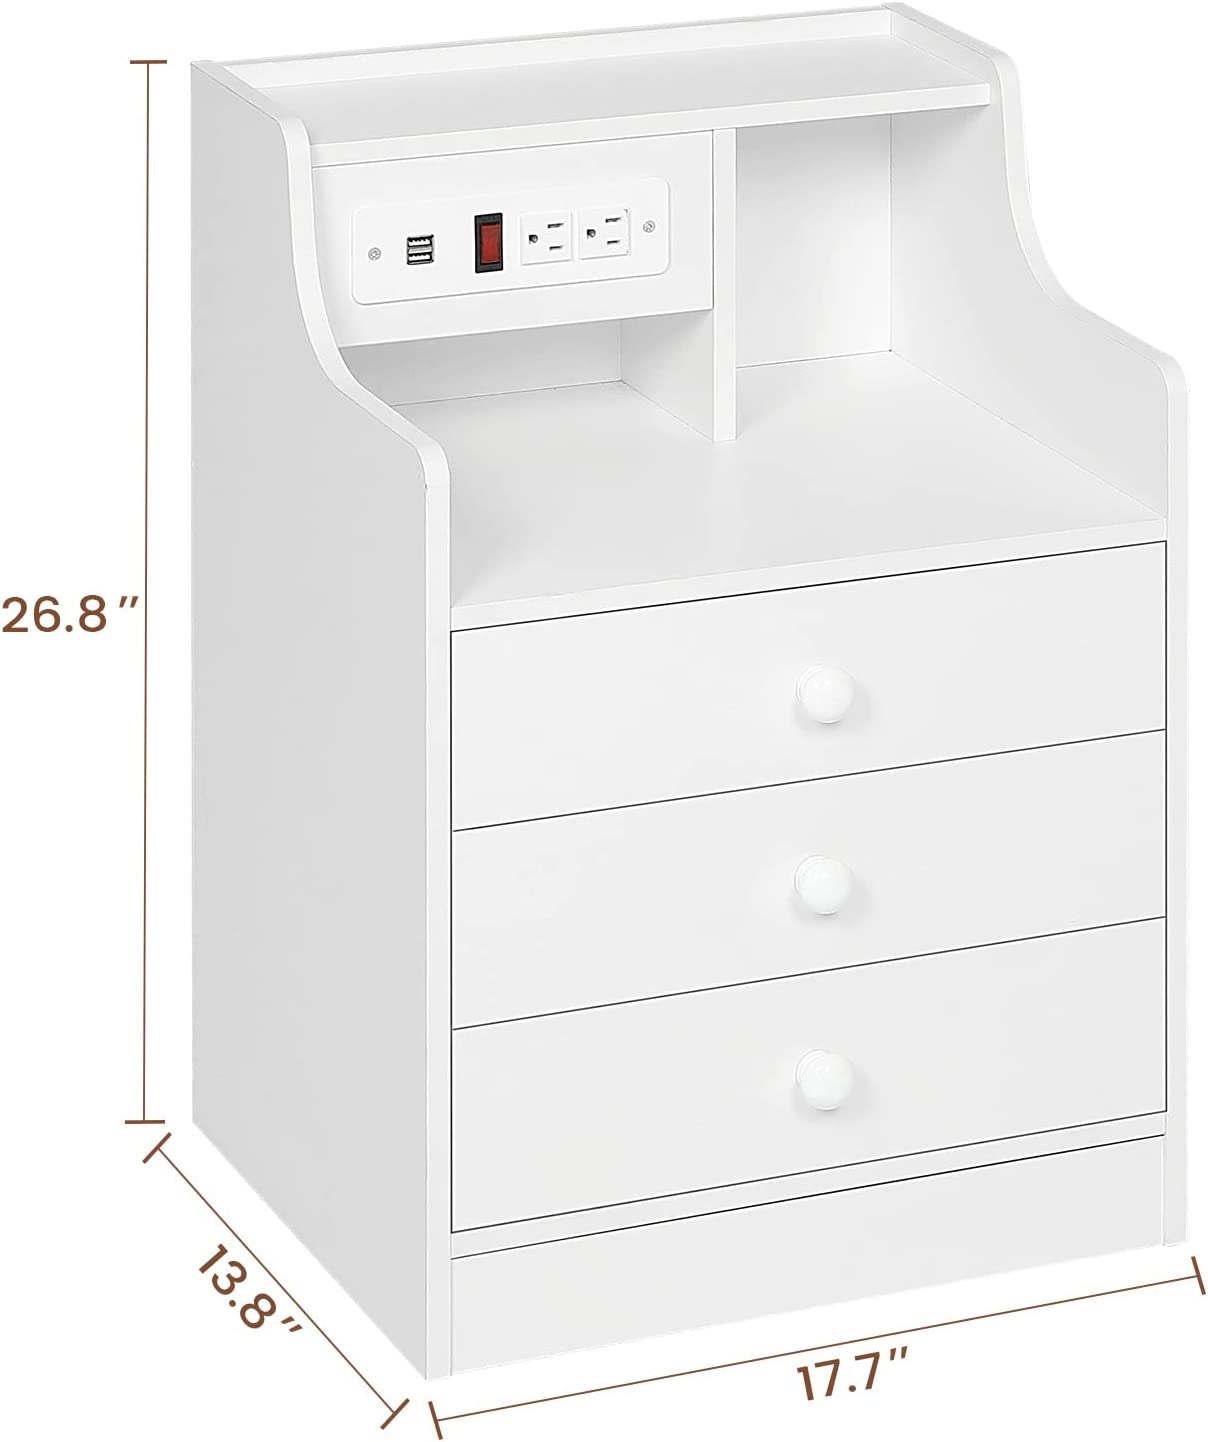 ADORNEVE Nightstand with Charging Station and 3 Storage Drawers, White - image 4 of 8